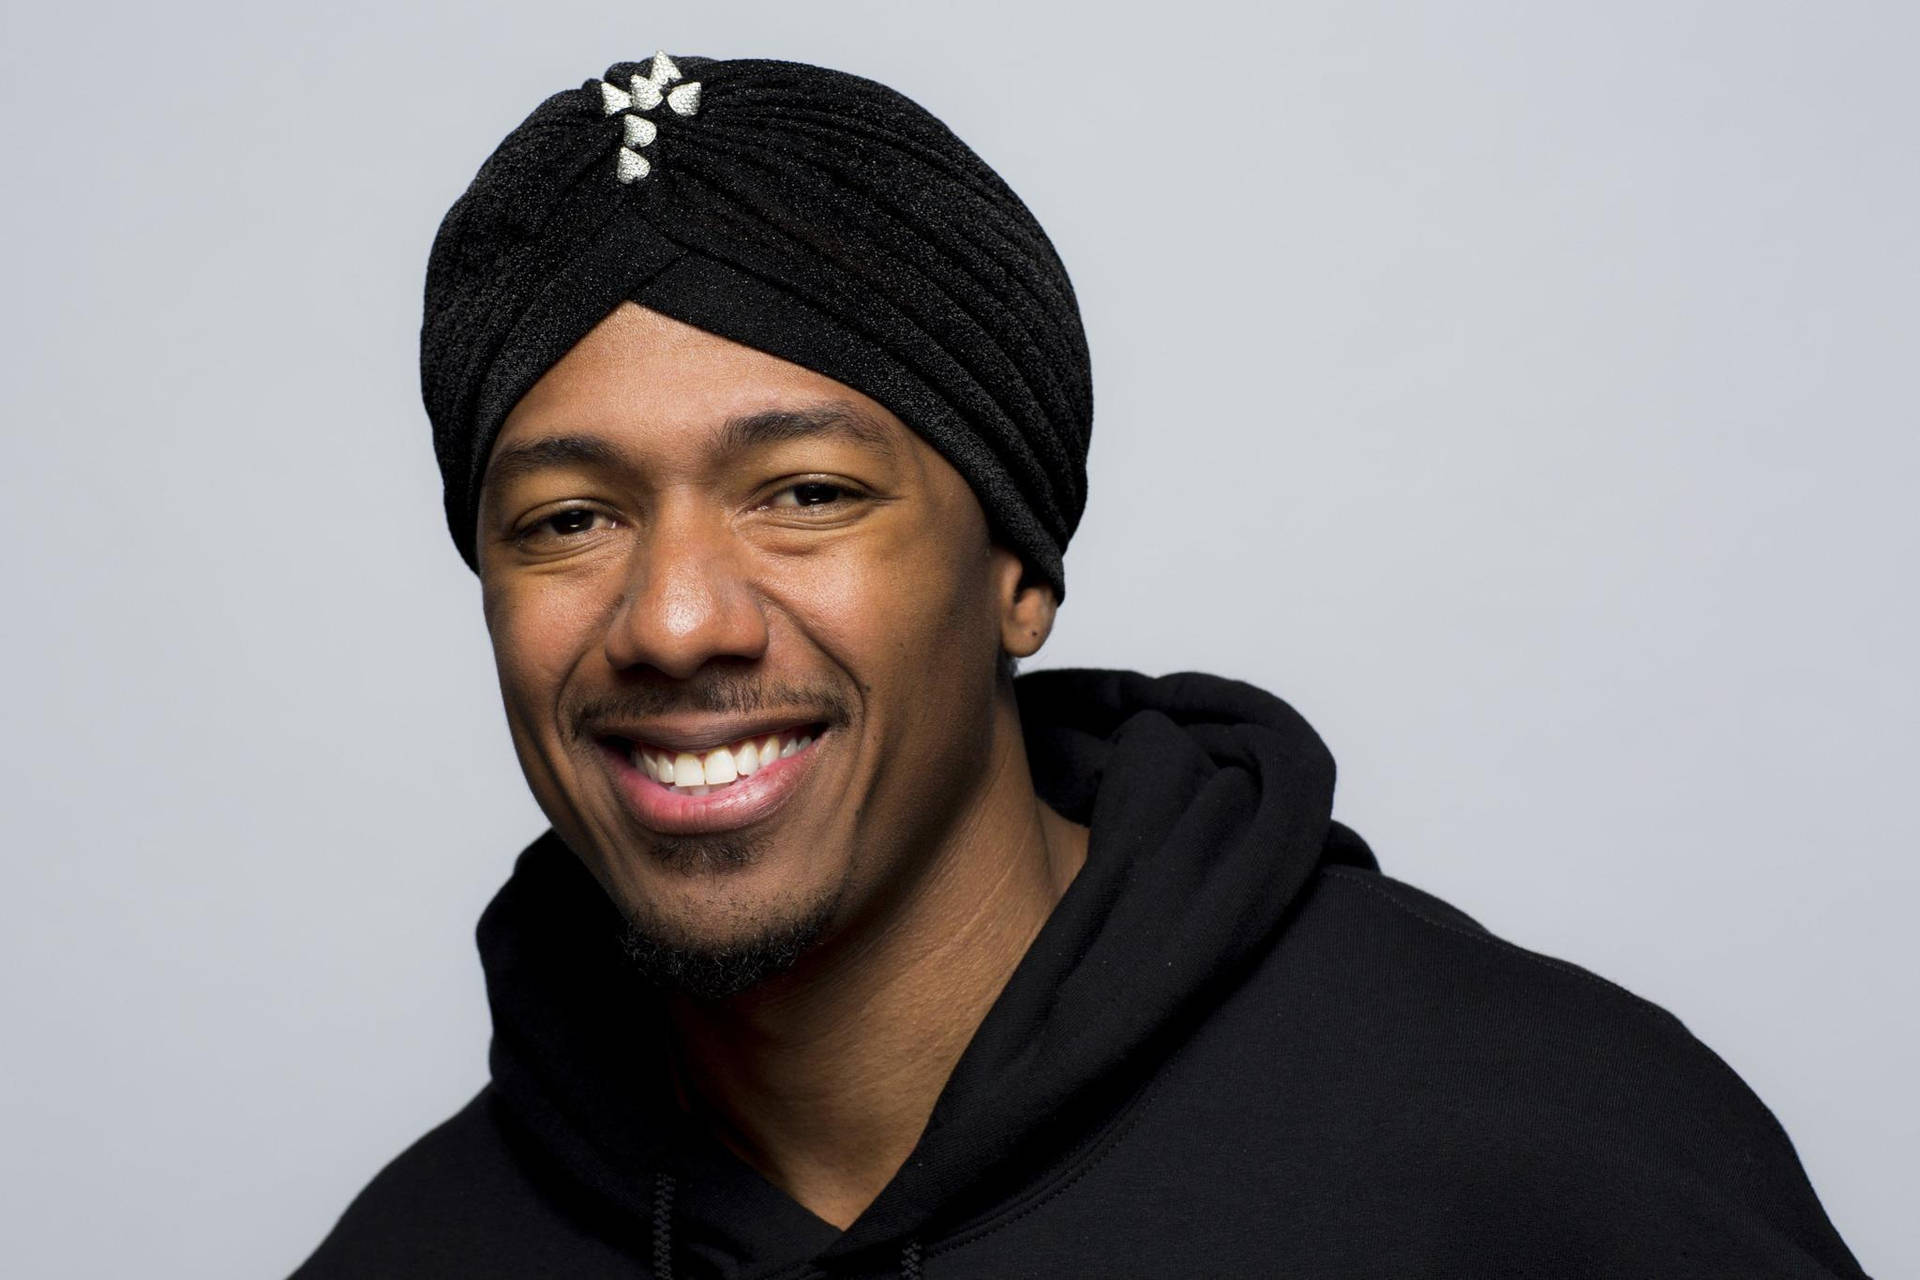 Nick Cannon Posing With Black Turban Background